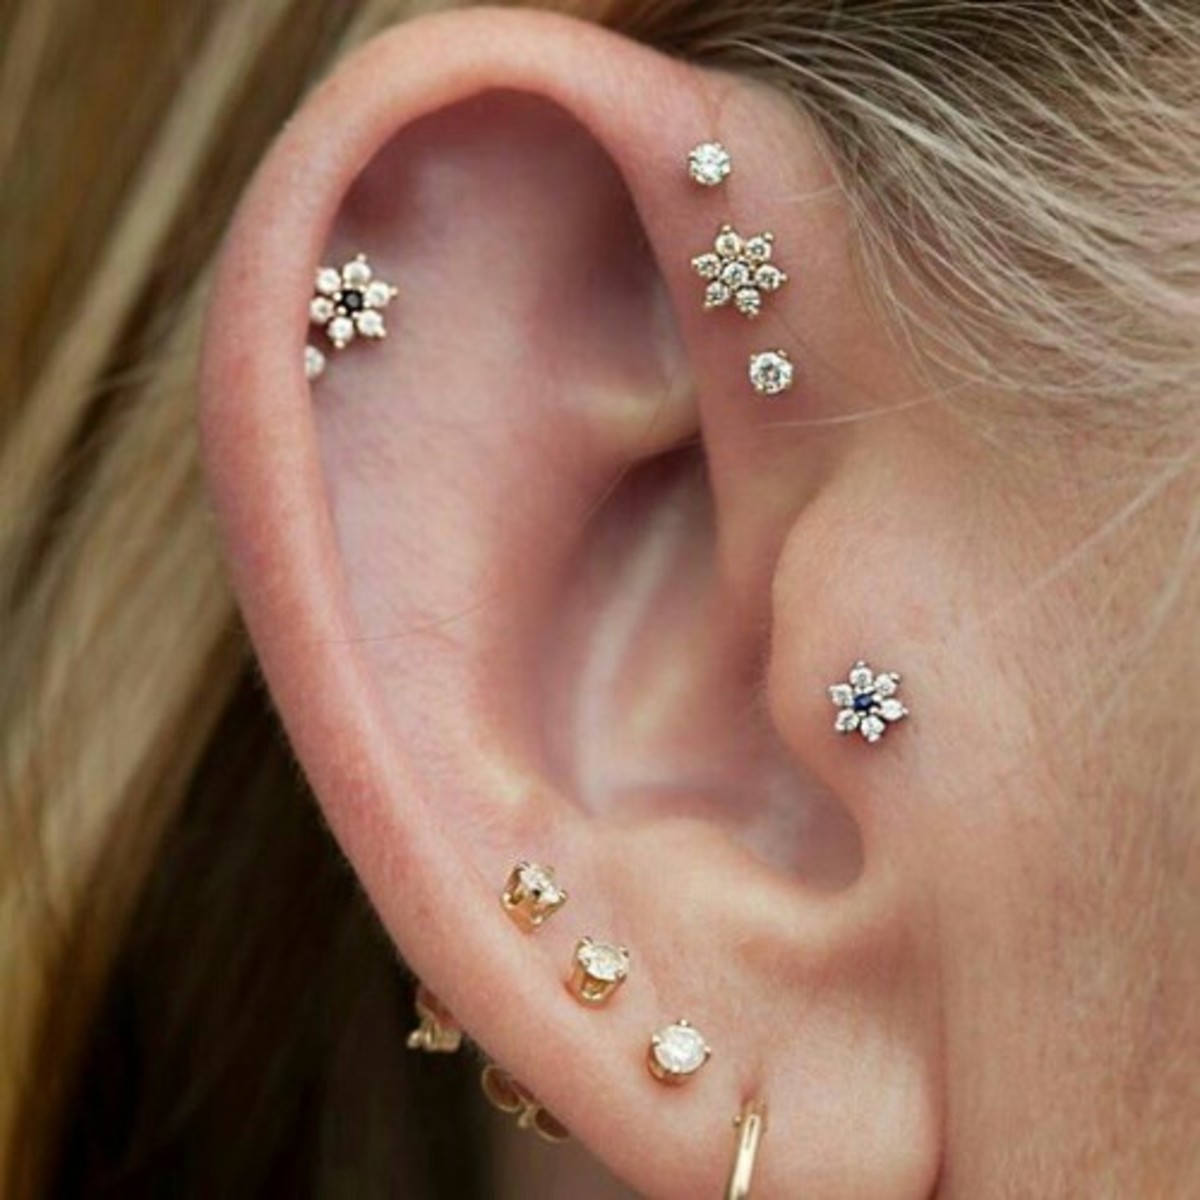 Ear Piercing: Everything you wish to know | HubPages